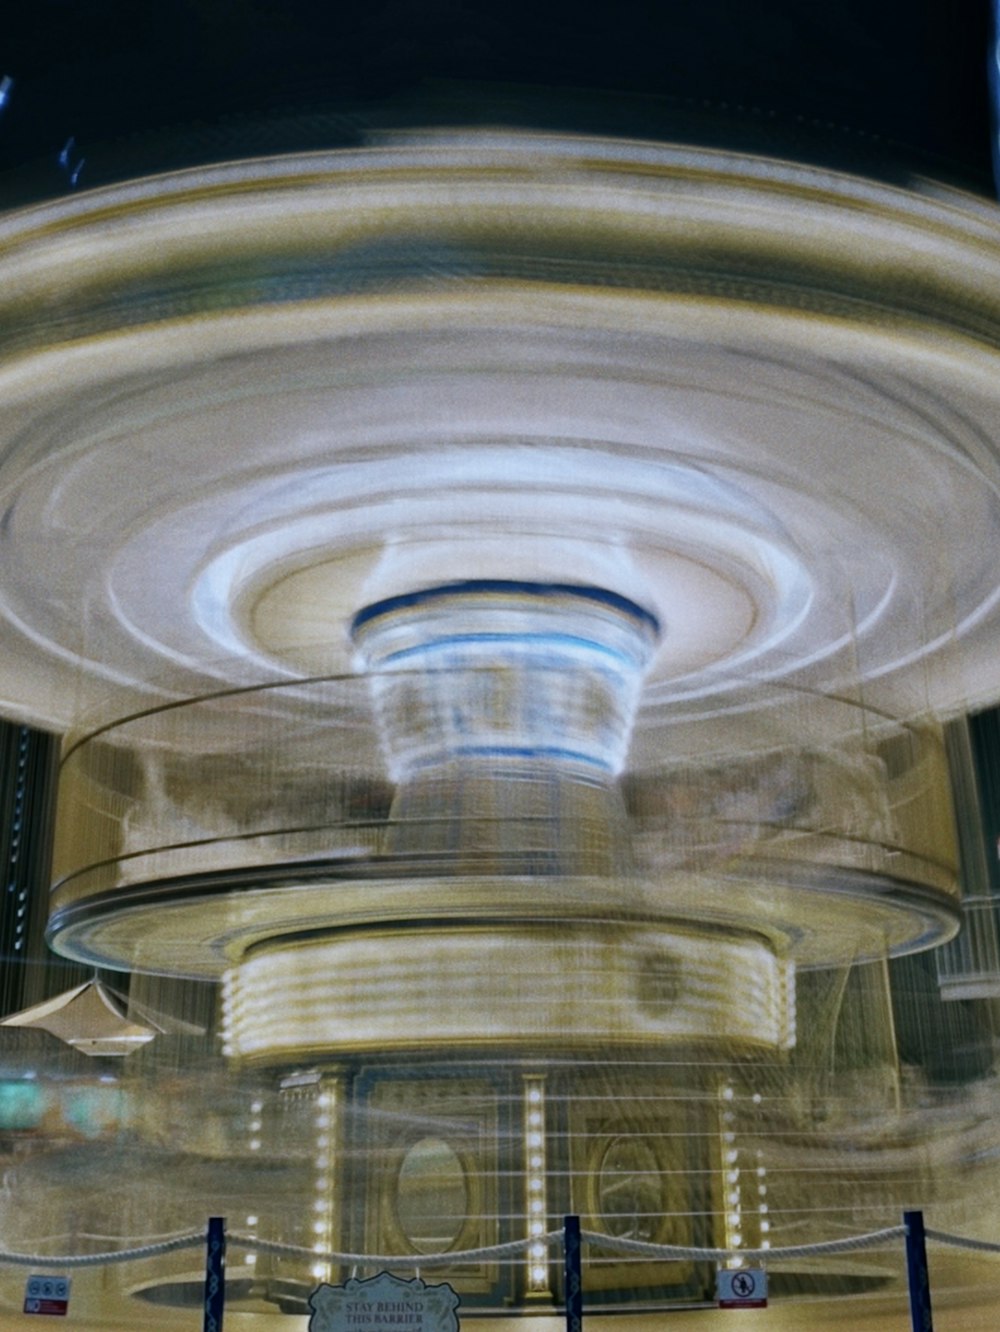 a blurry photo of a circular object in a building